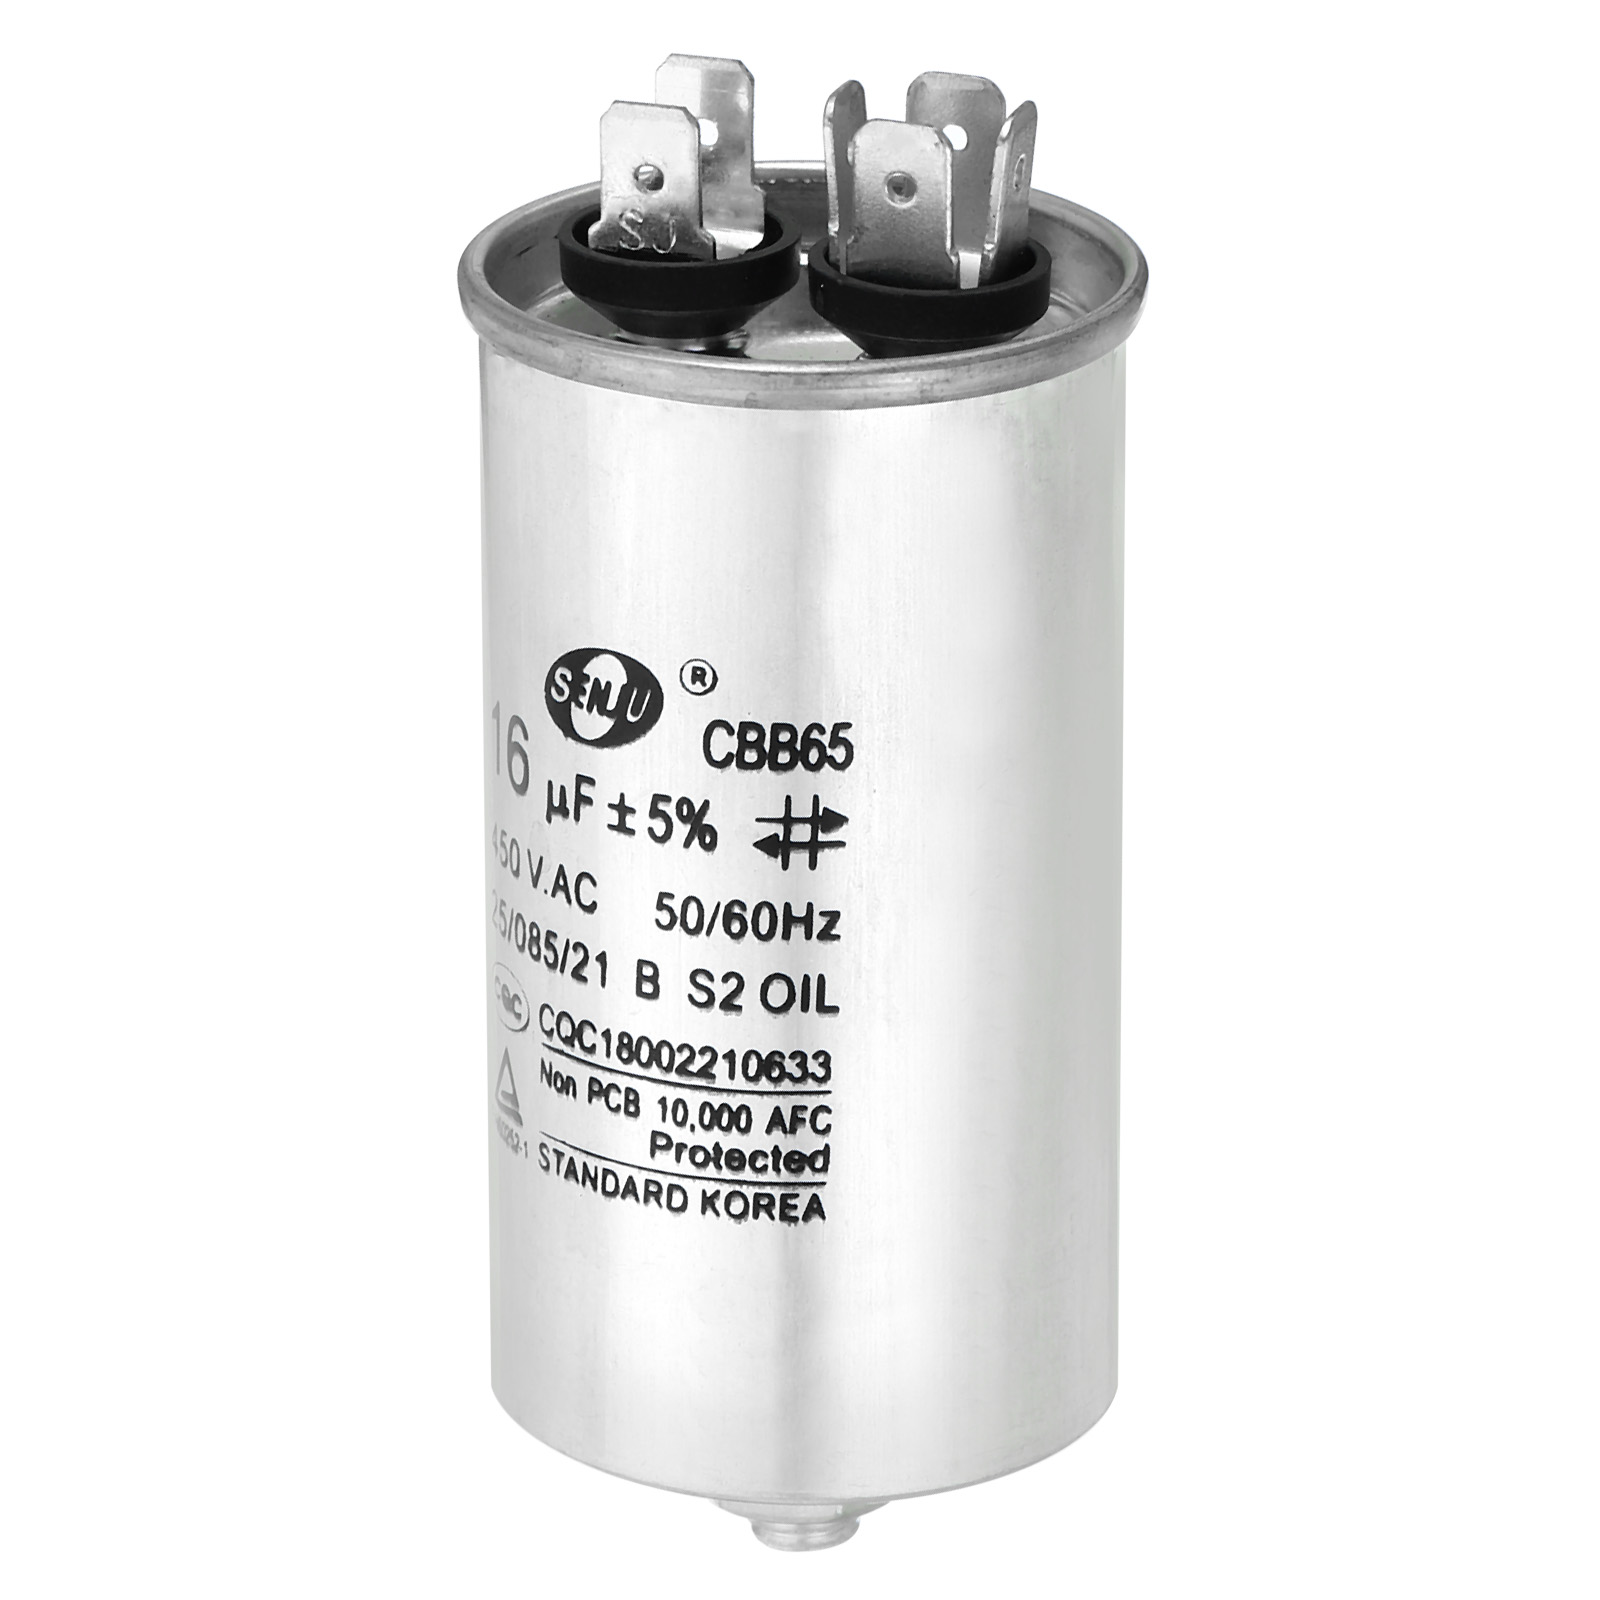 16uF 16MDF 450VAC Fan Start Capacitor, CBB65 Circular Run Capacitor with Screws for Air Conditioner - image 1 of 5